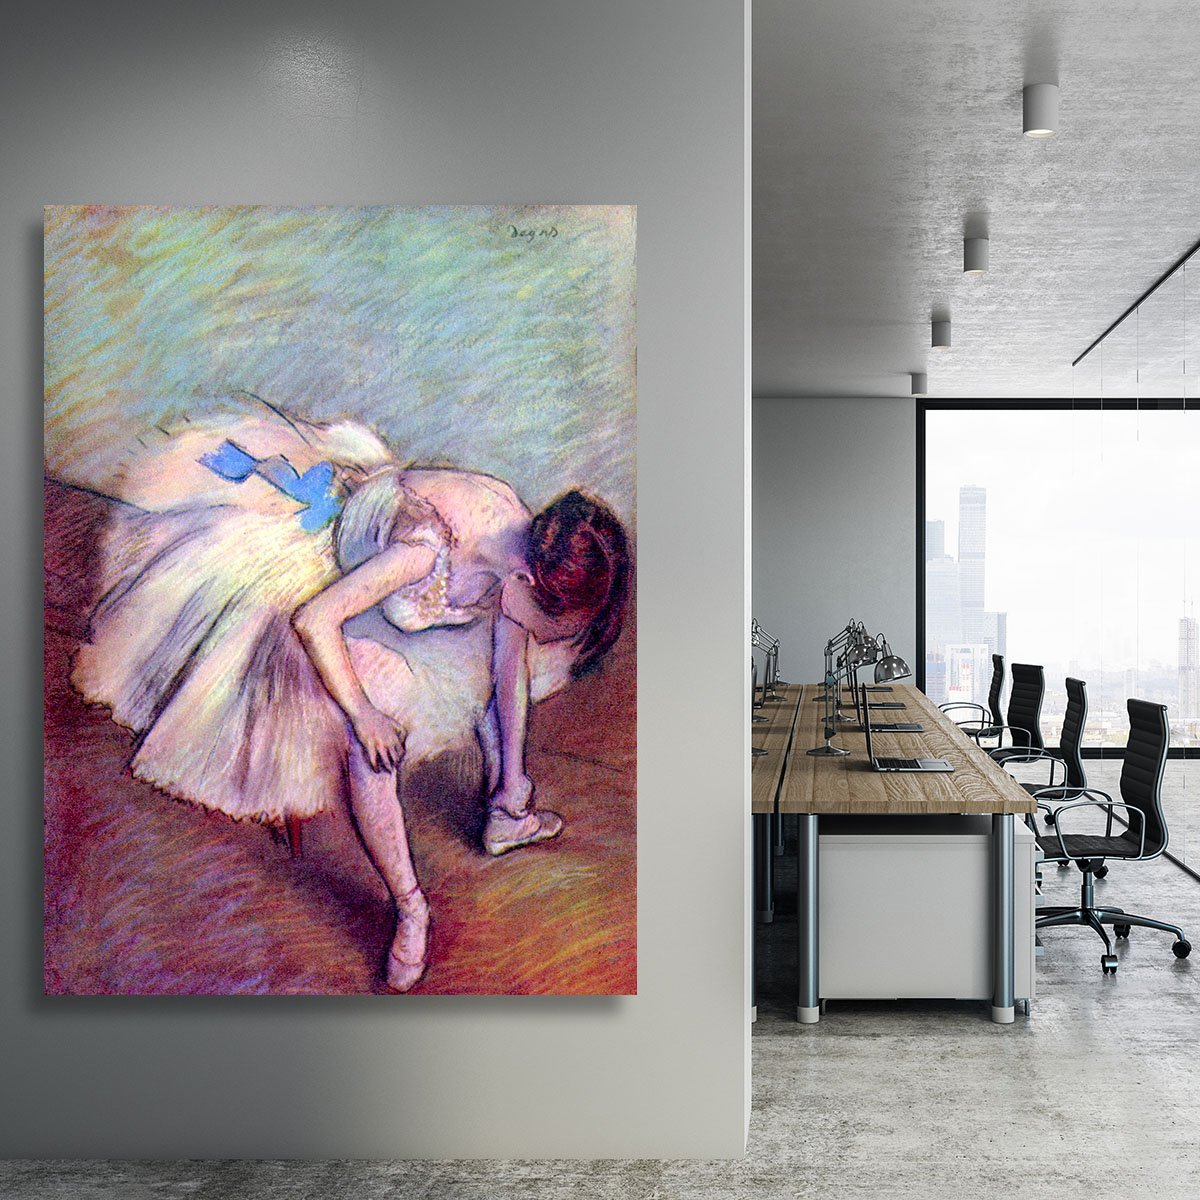 Dancer 2 by Degas Canvas Print or Poster